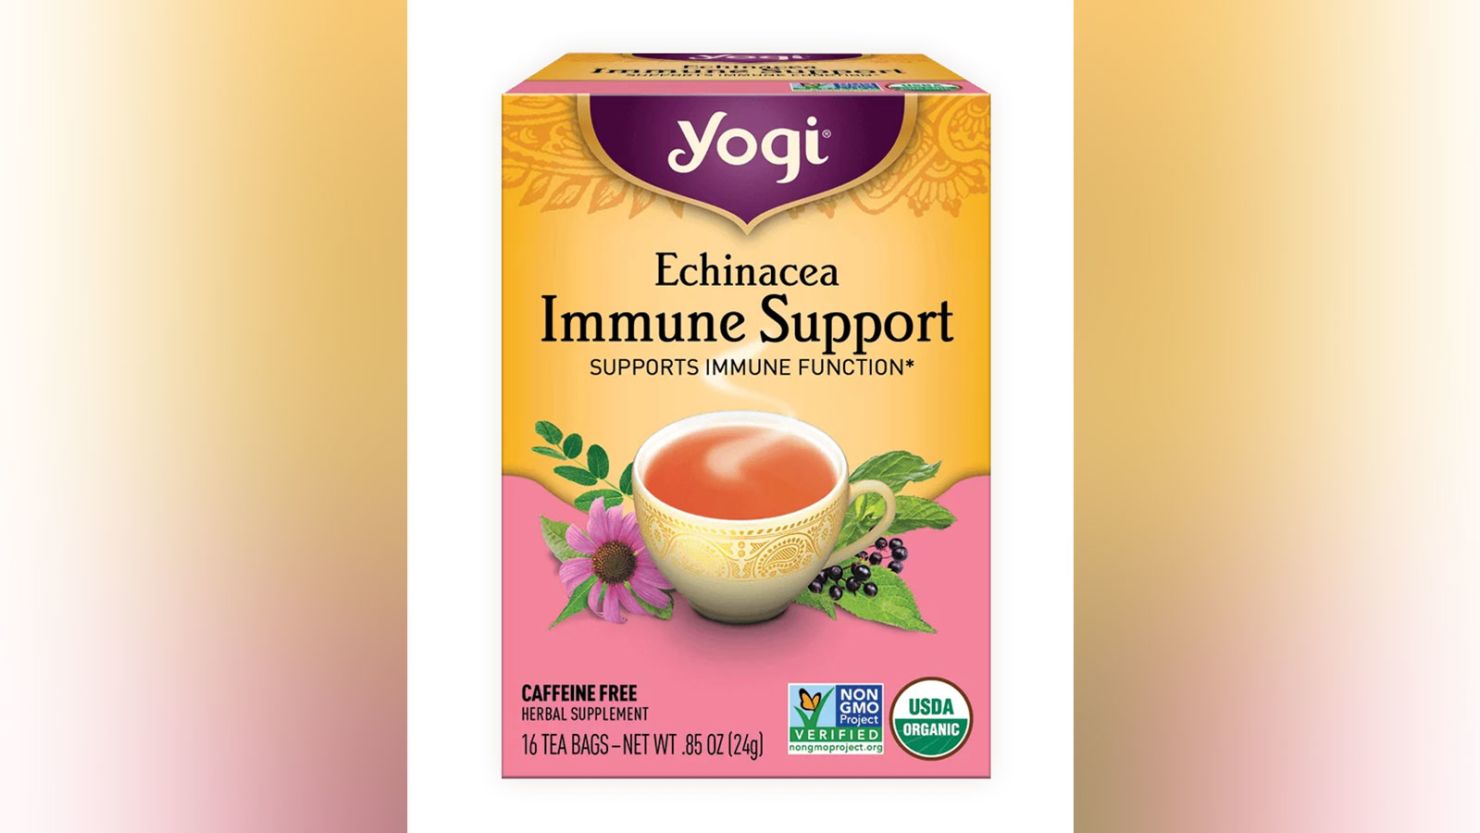 Yogi Echinacea Immune Support tea is sold in stores across the country.